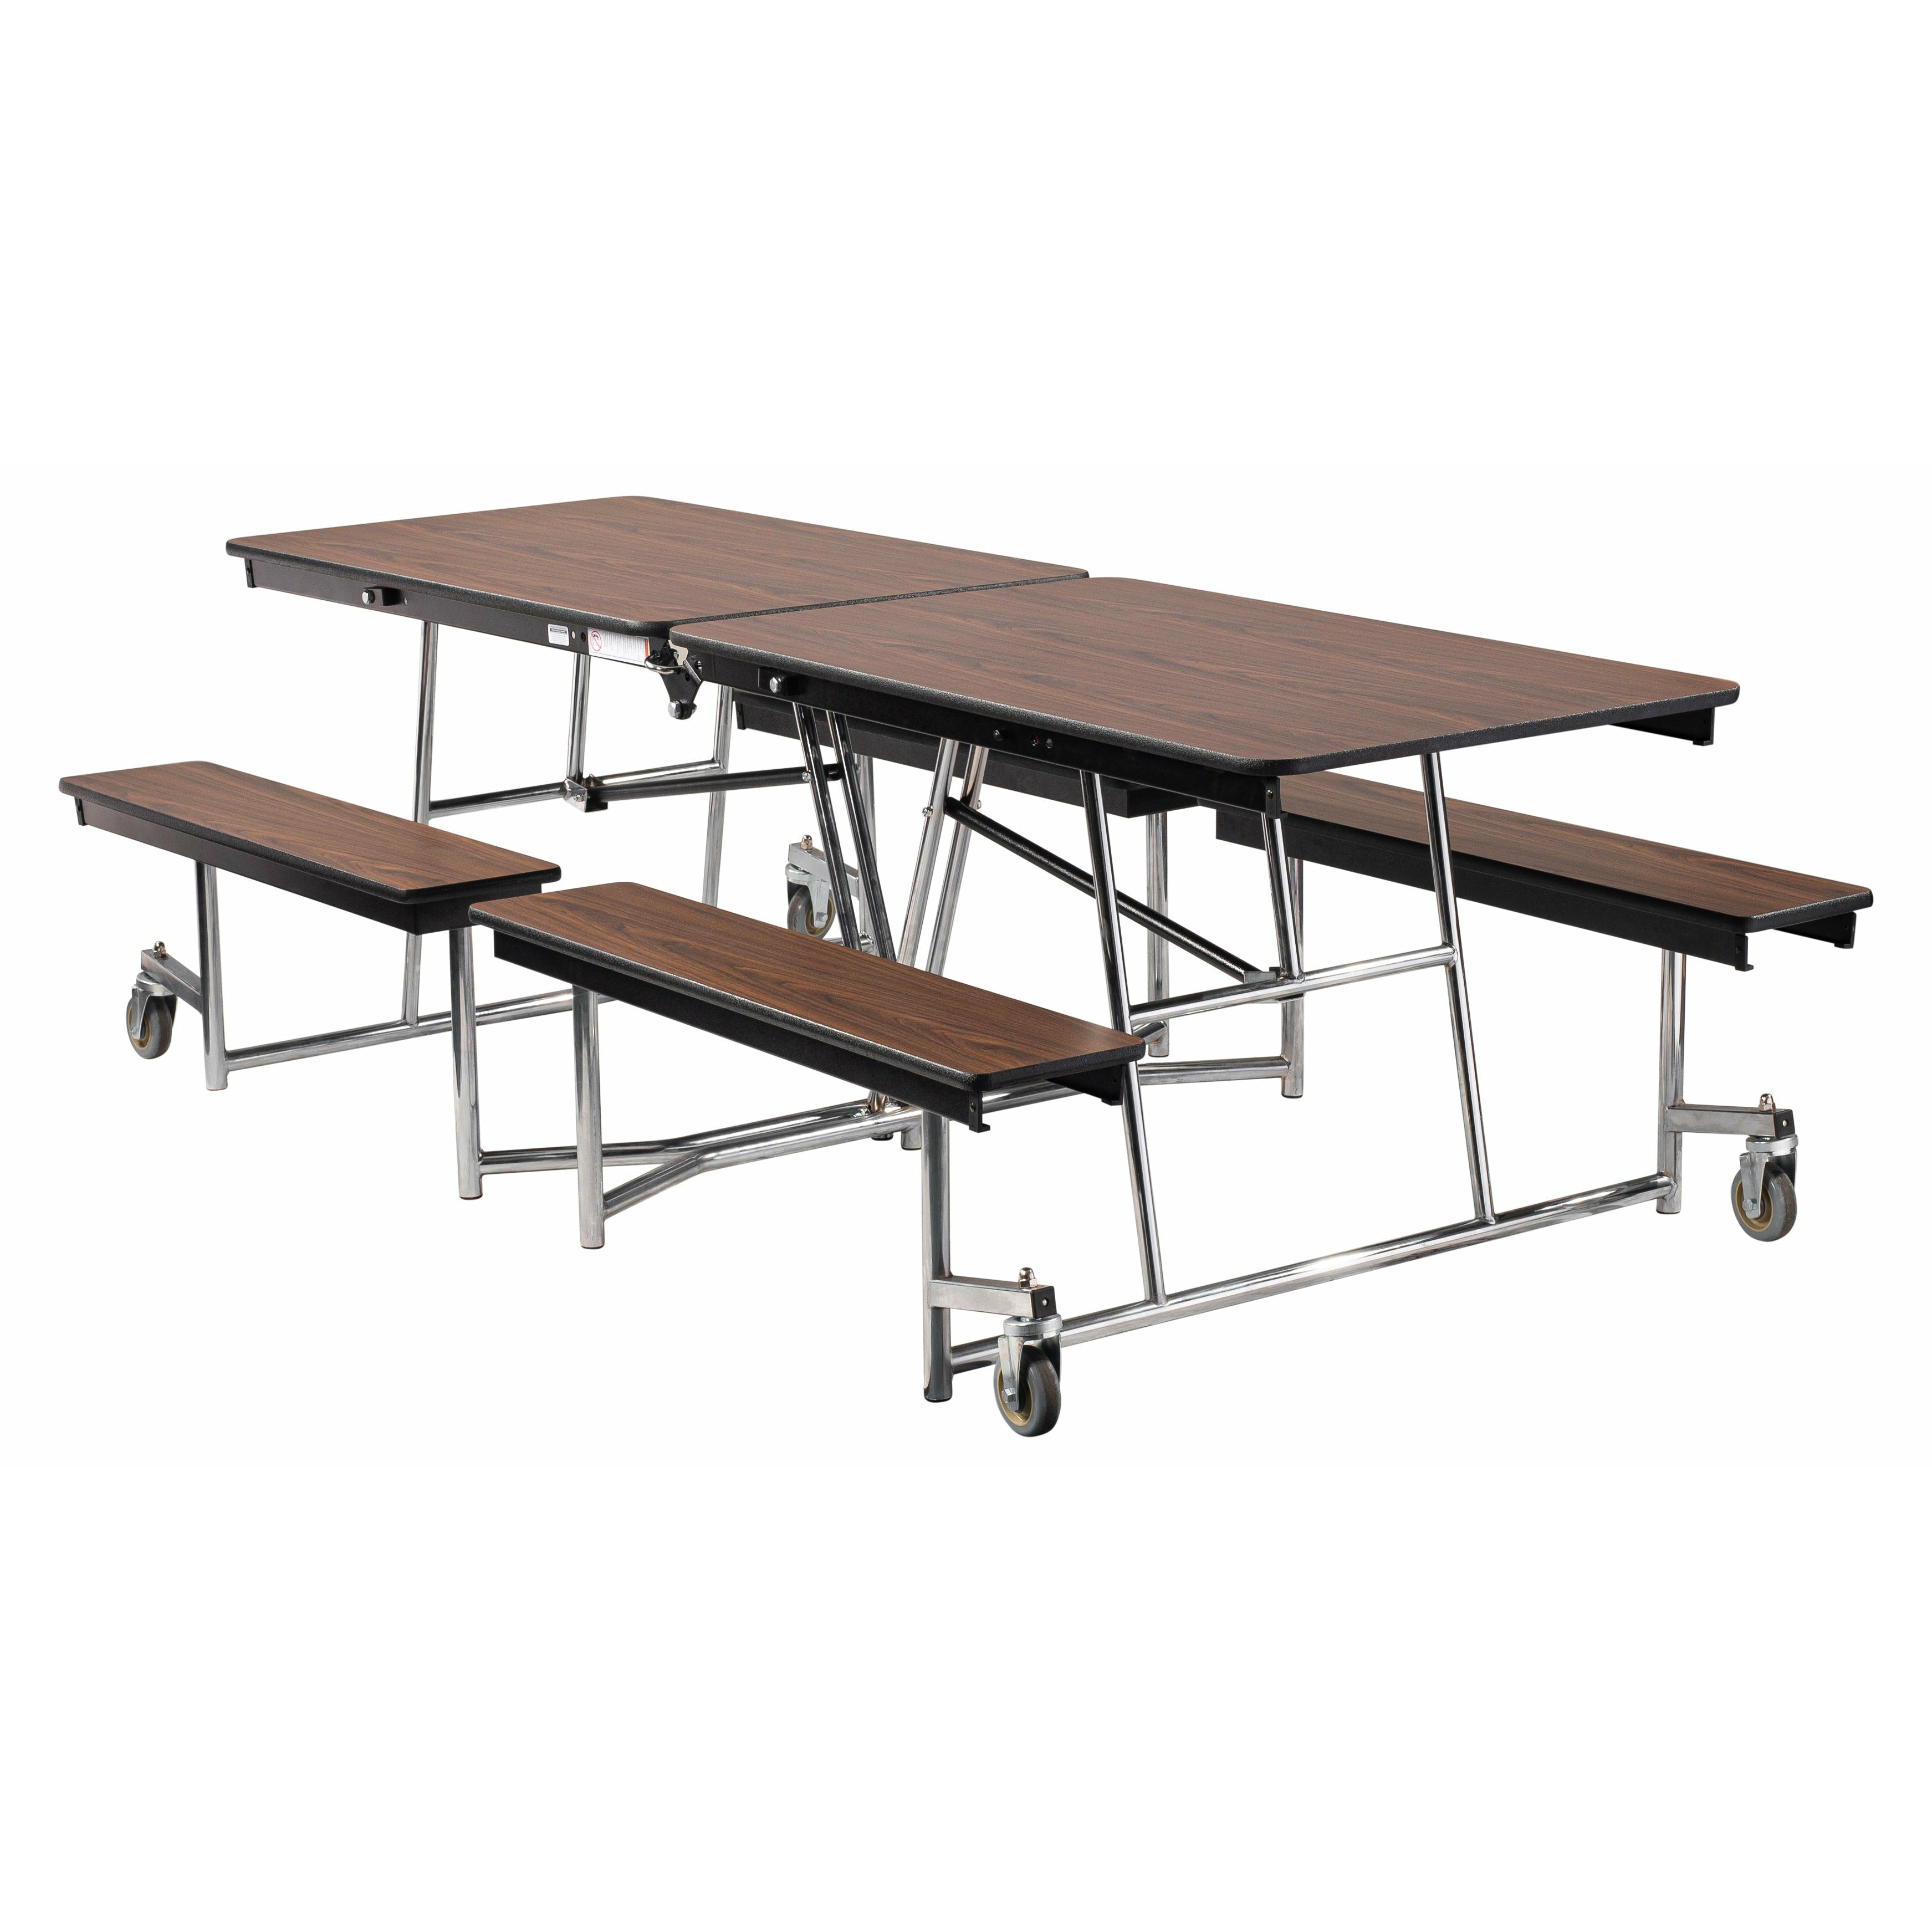 NPS® Mobile Table with Benches, 8'L, MDF Core, ProtectEdge, Textured Black Frame